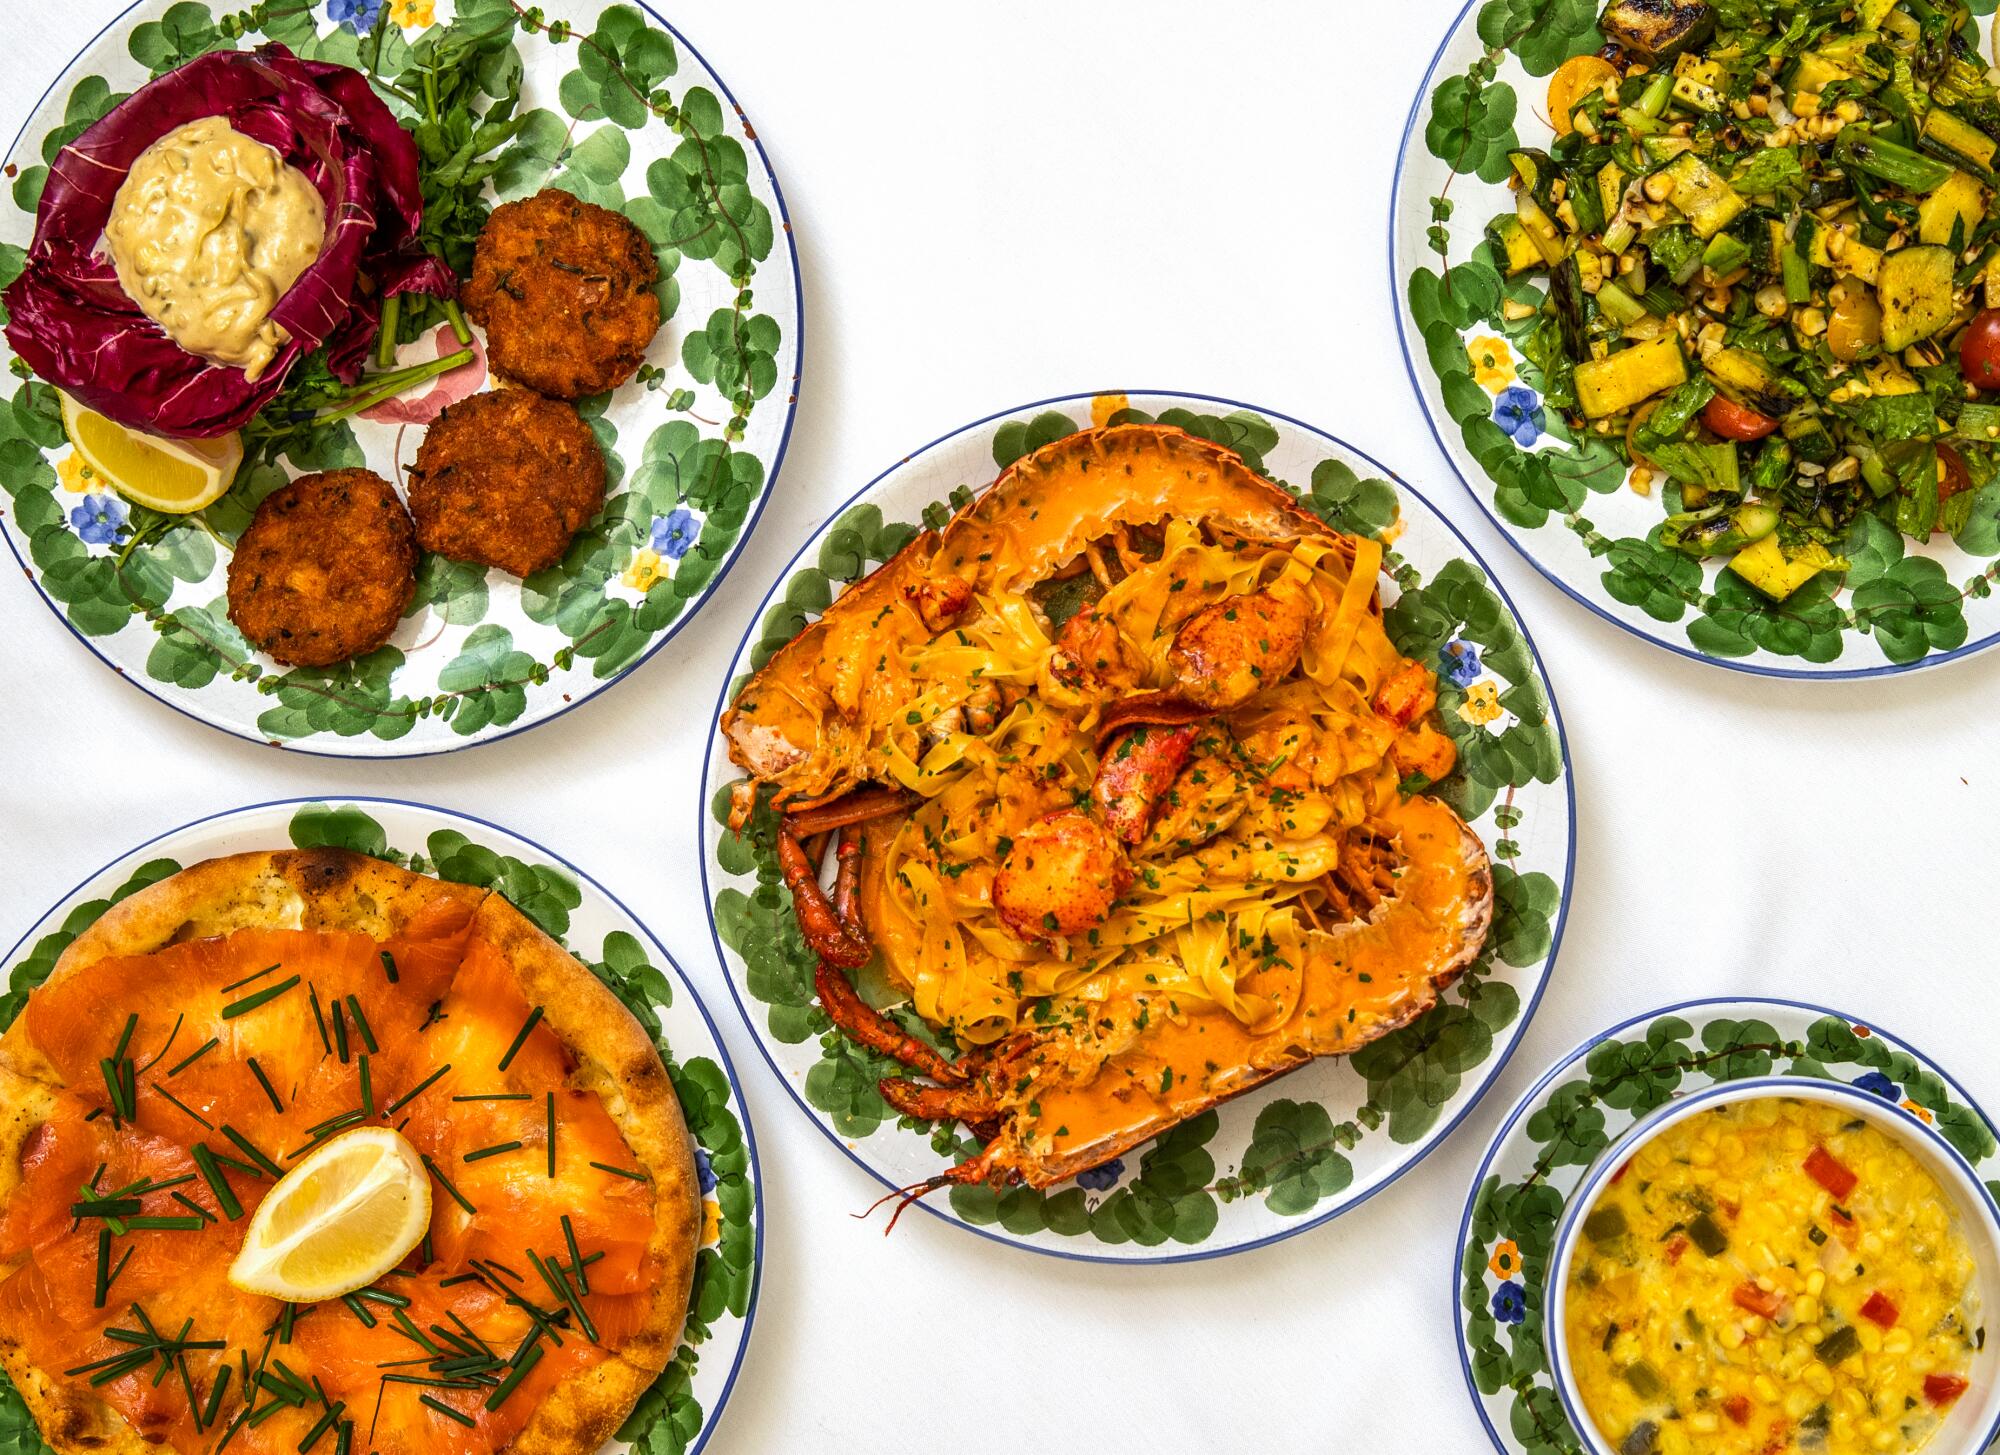 An array of dishes on plates decorated with green leafy motifs.